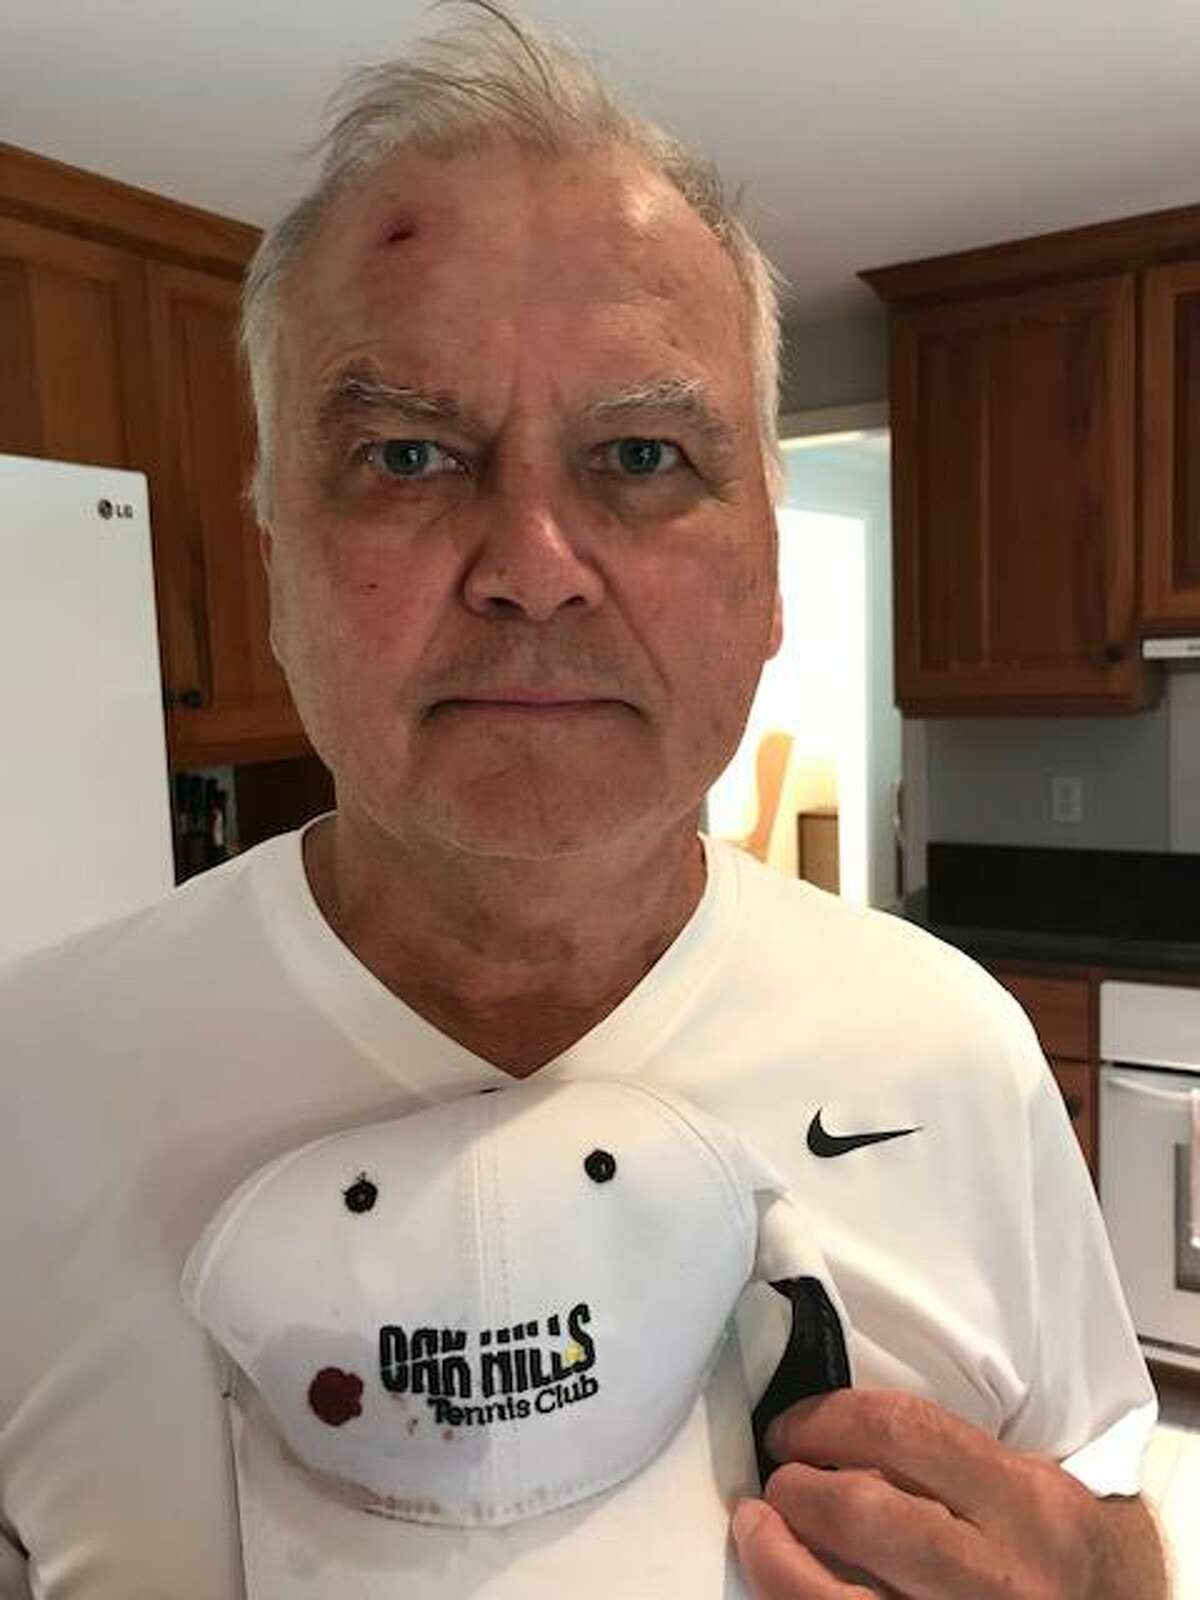 After tennis player hit in head with stray golf ball, Norwalk's Oak Hills  considers safety options